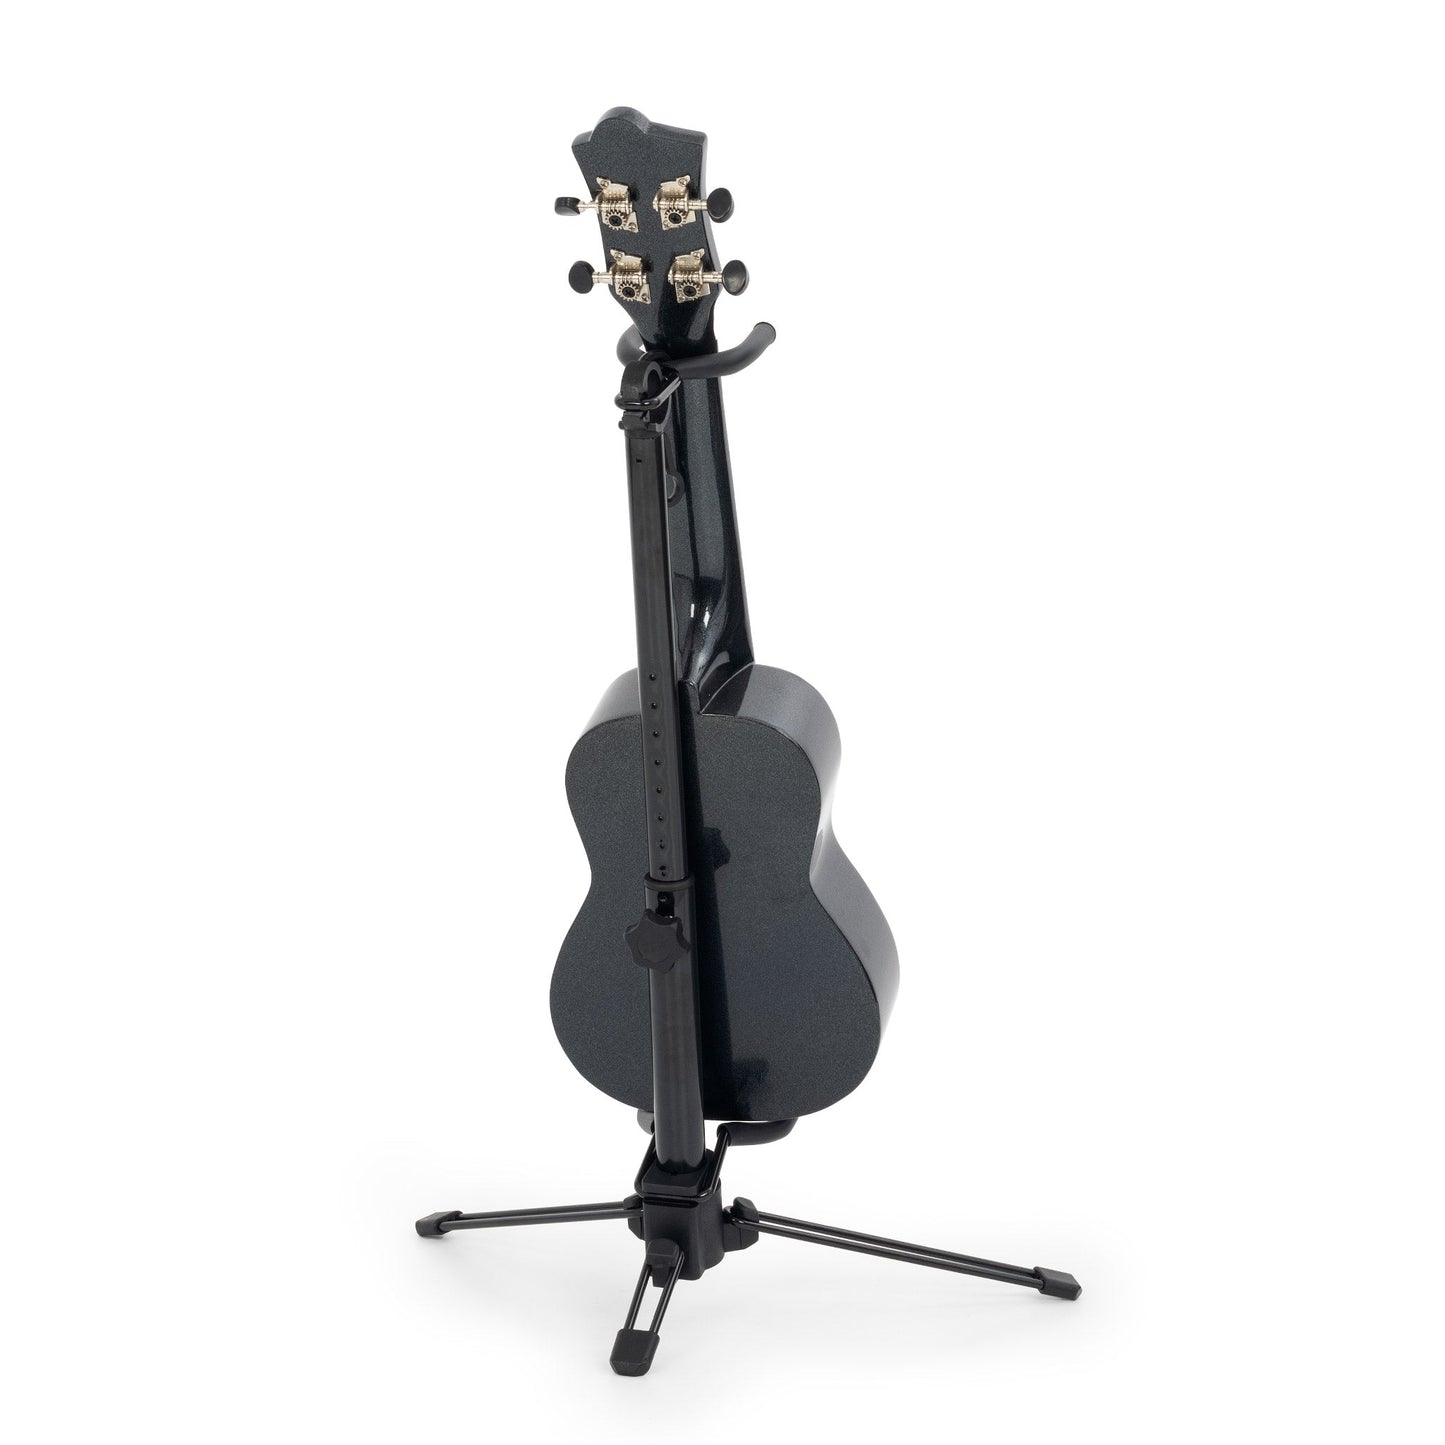 Octopus GS1650 Retractable Ukulele Stand - also suitable for violin